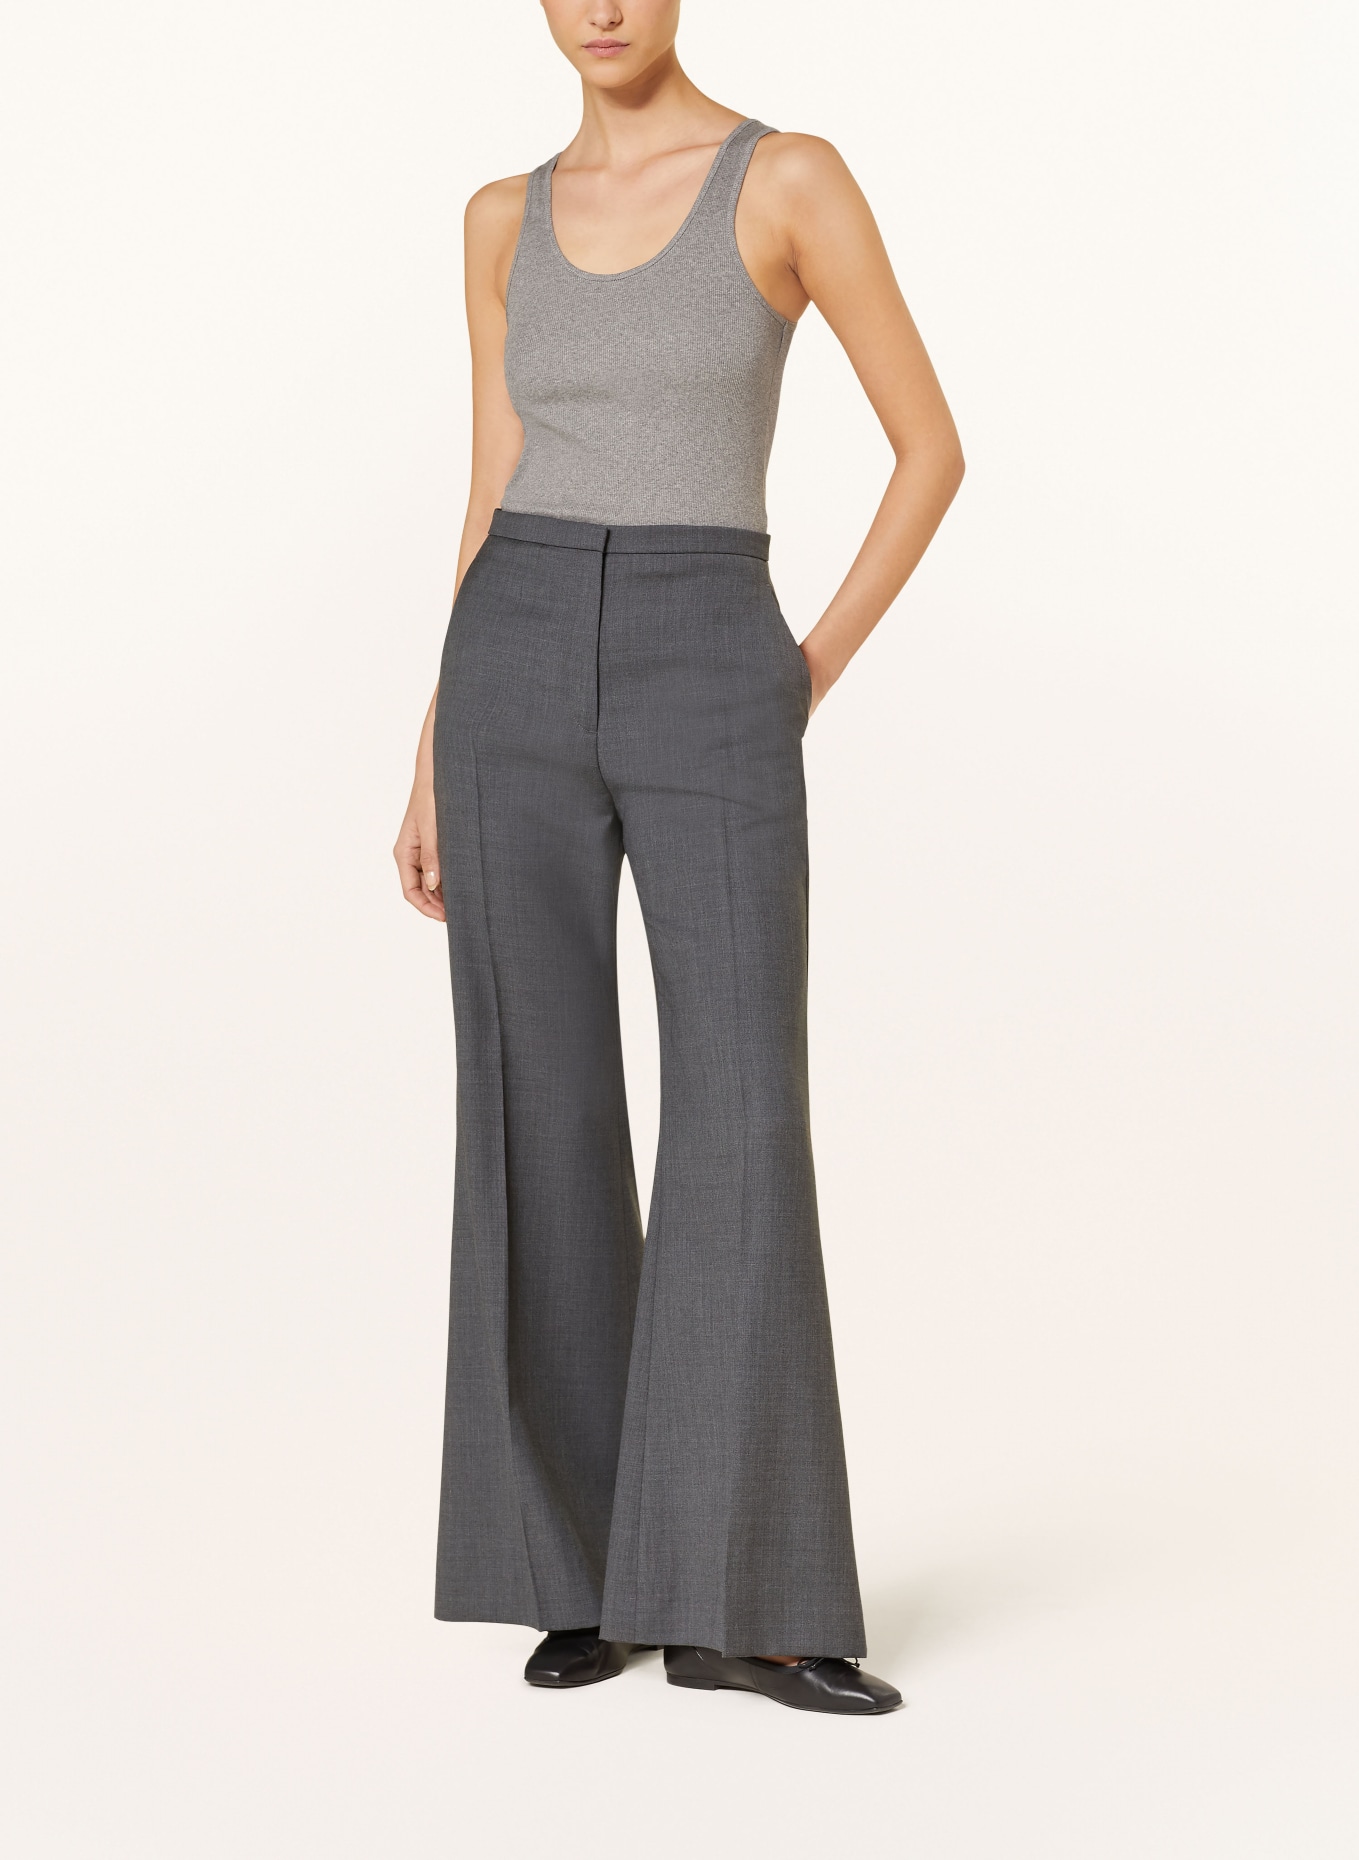 BY MALENE BIRGER Top ANISA, Color: GRAY (Image 2)